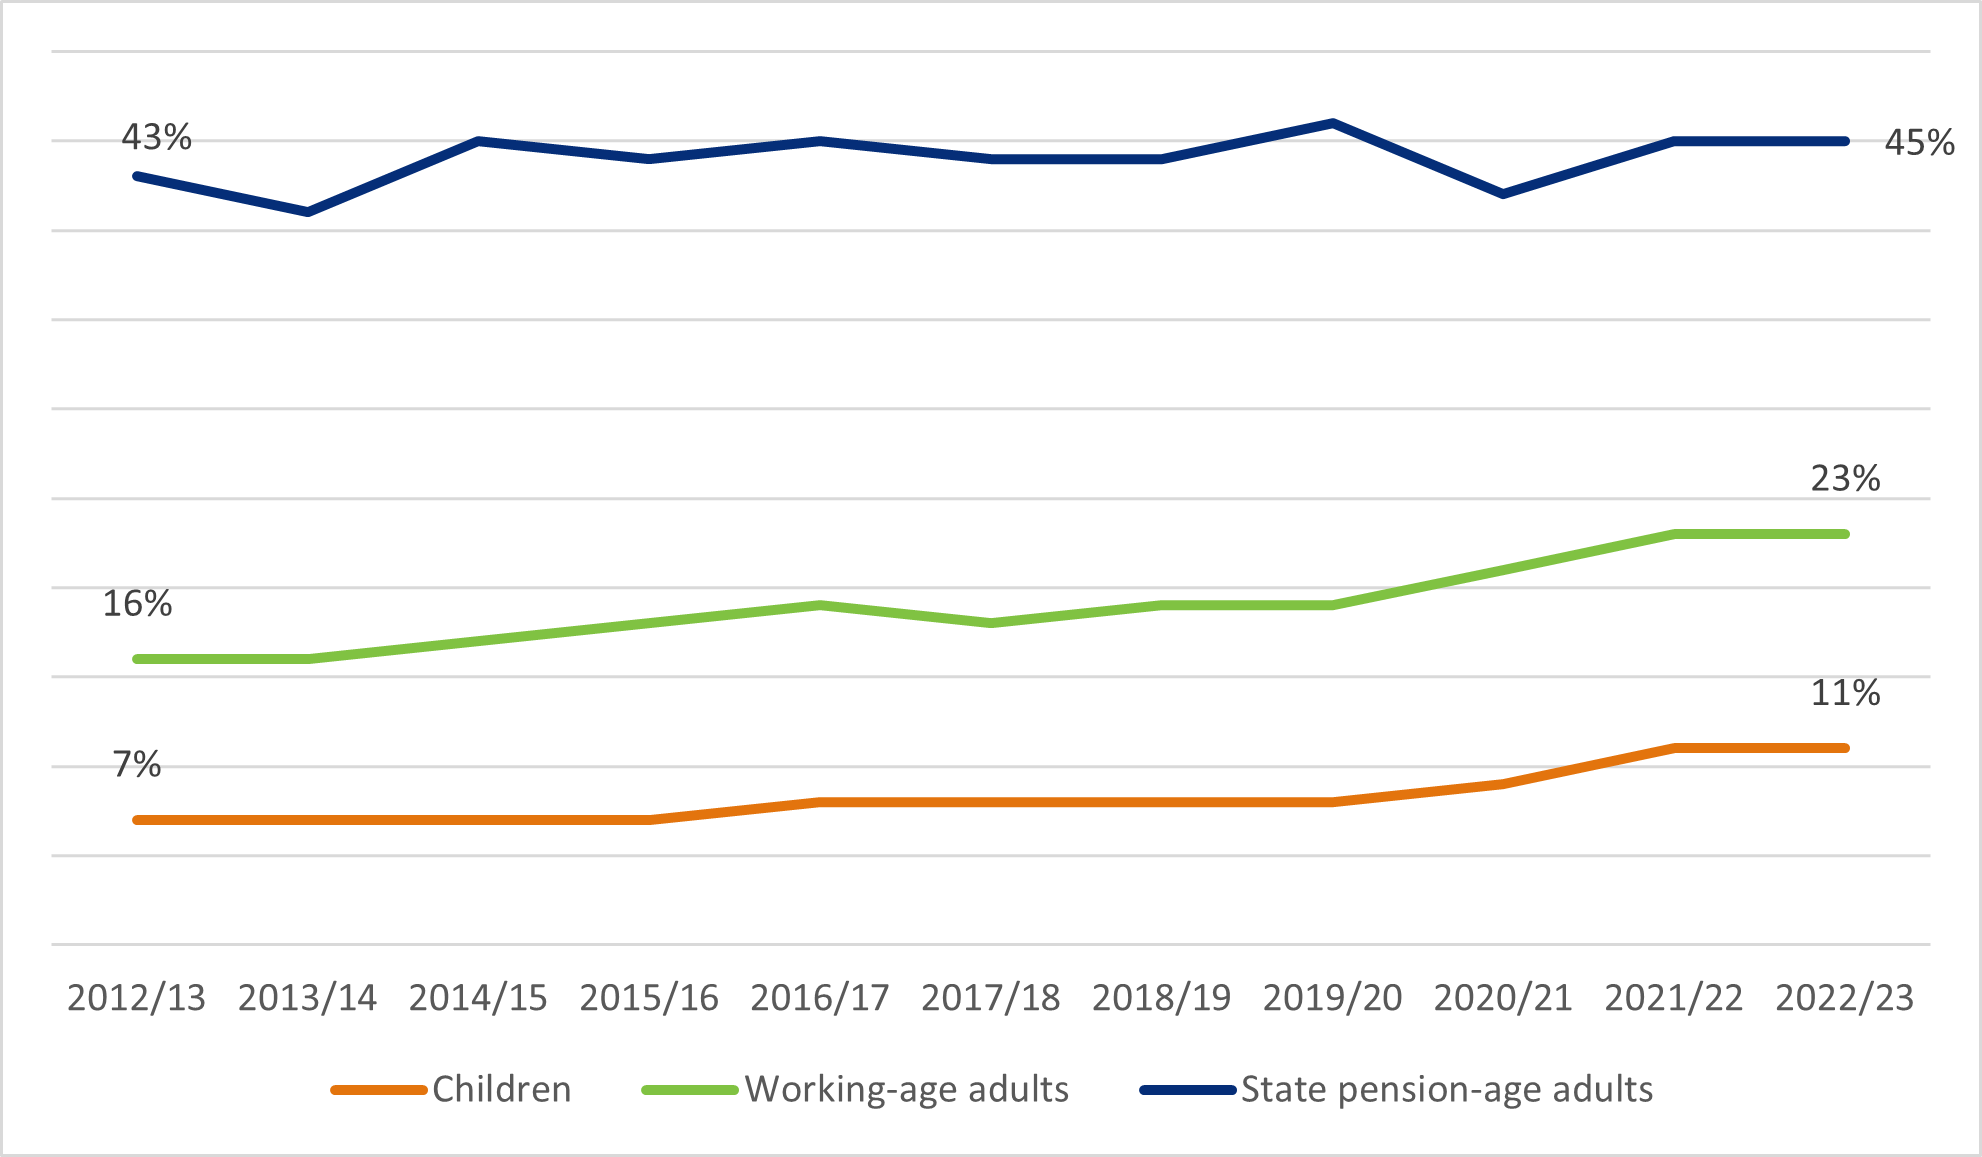 A graph showing the percentage of disabled children, disabled working-age adults, and disabled state pension-age adults since 2012 - 2013. It shows that since 2012-2013 there has been an increase of four percentage points for disabled children (11%), seven percentage points for disabled adults (23%), and two percentage points for state pension-age disabled adults (45%).